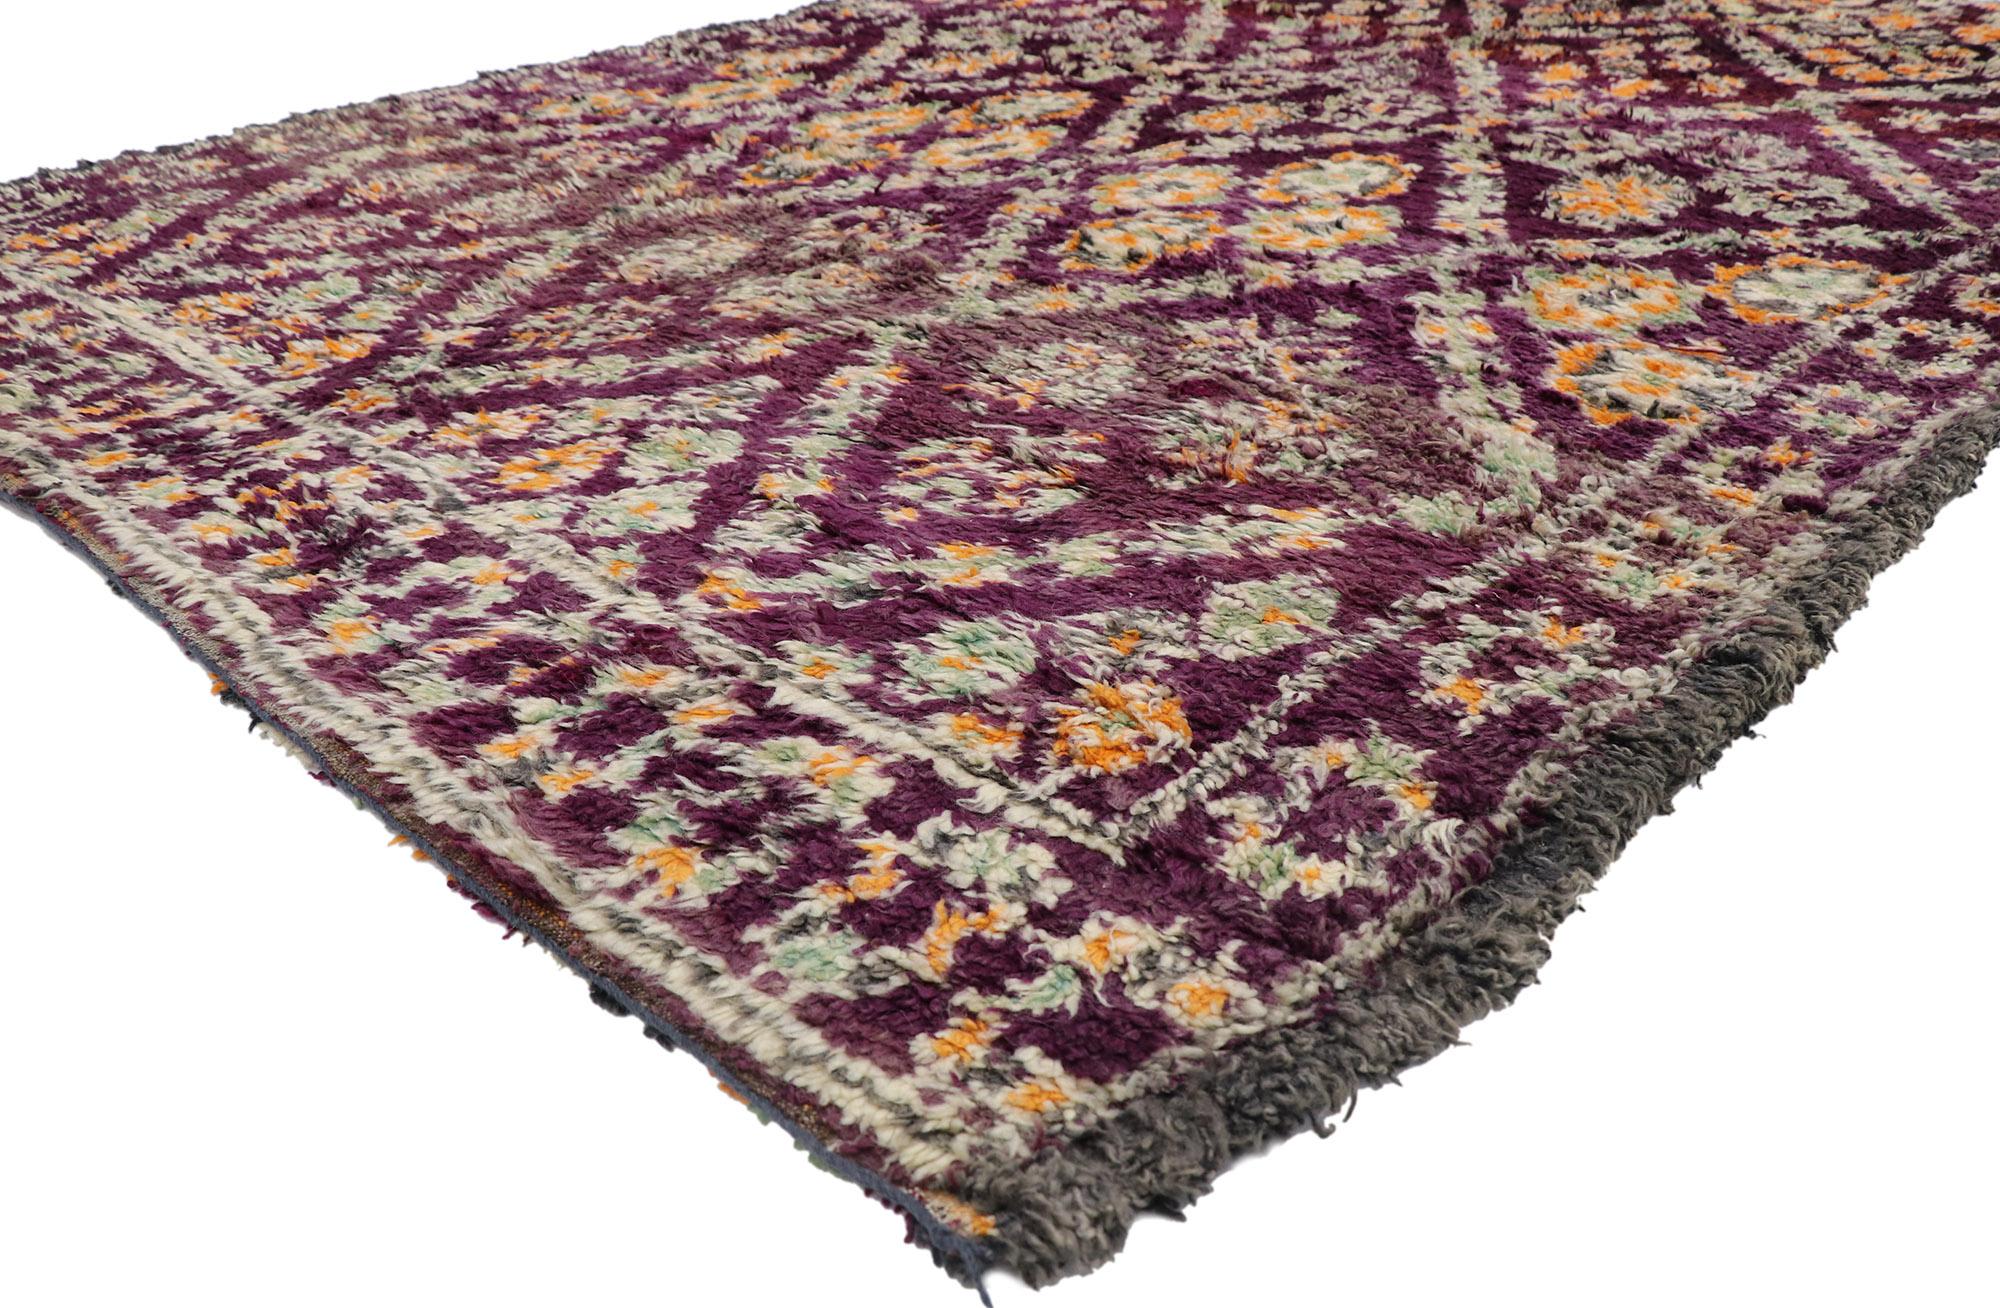 21211 vintage Berber Beni M'Guild Moroccan rug with Bohemian Tribal style 06'10 x 10'05. Showcasing a bold expressive design, incredible detail and texture, this hand knotted wool vintage Berber Beni M'Guild Moroccan rug is a captivating vision of